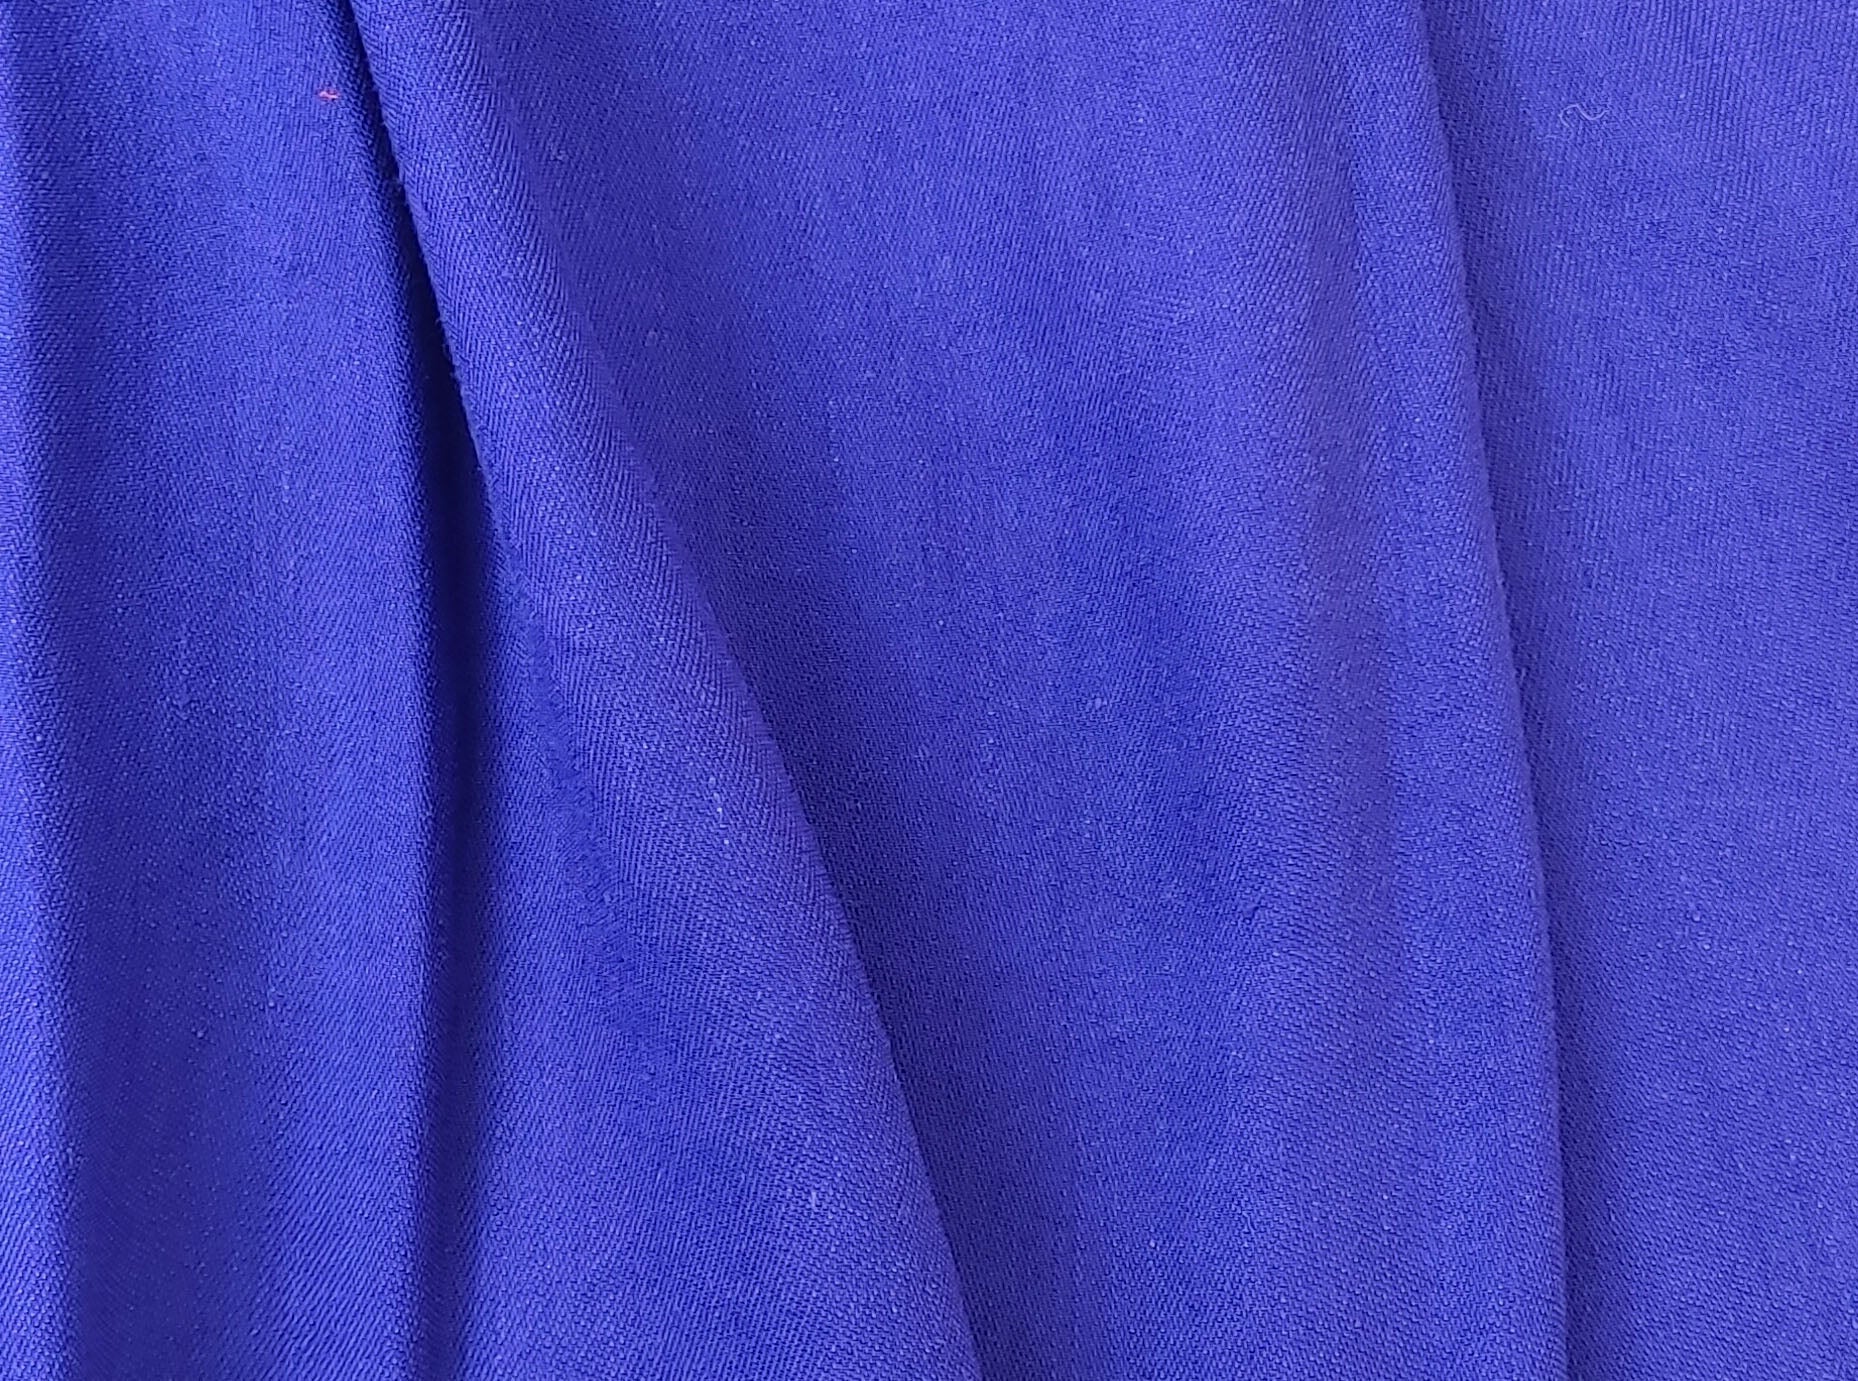 Satin Elegance: Linen Rayon Fabric with Polished Satin Weave 6090 6620 6659 7472 7293 - The Linen Lab - Violet